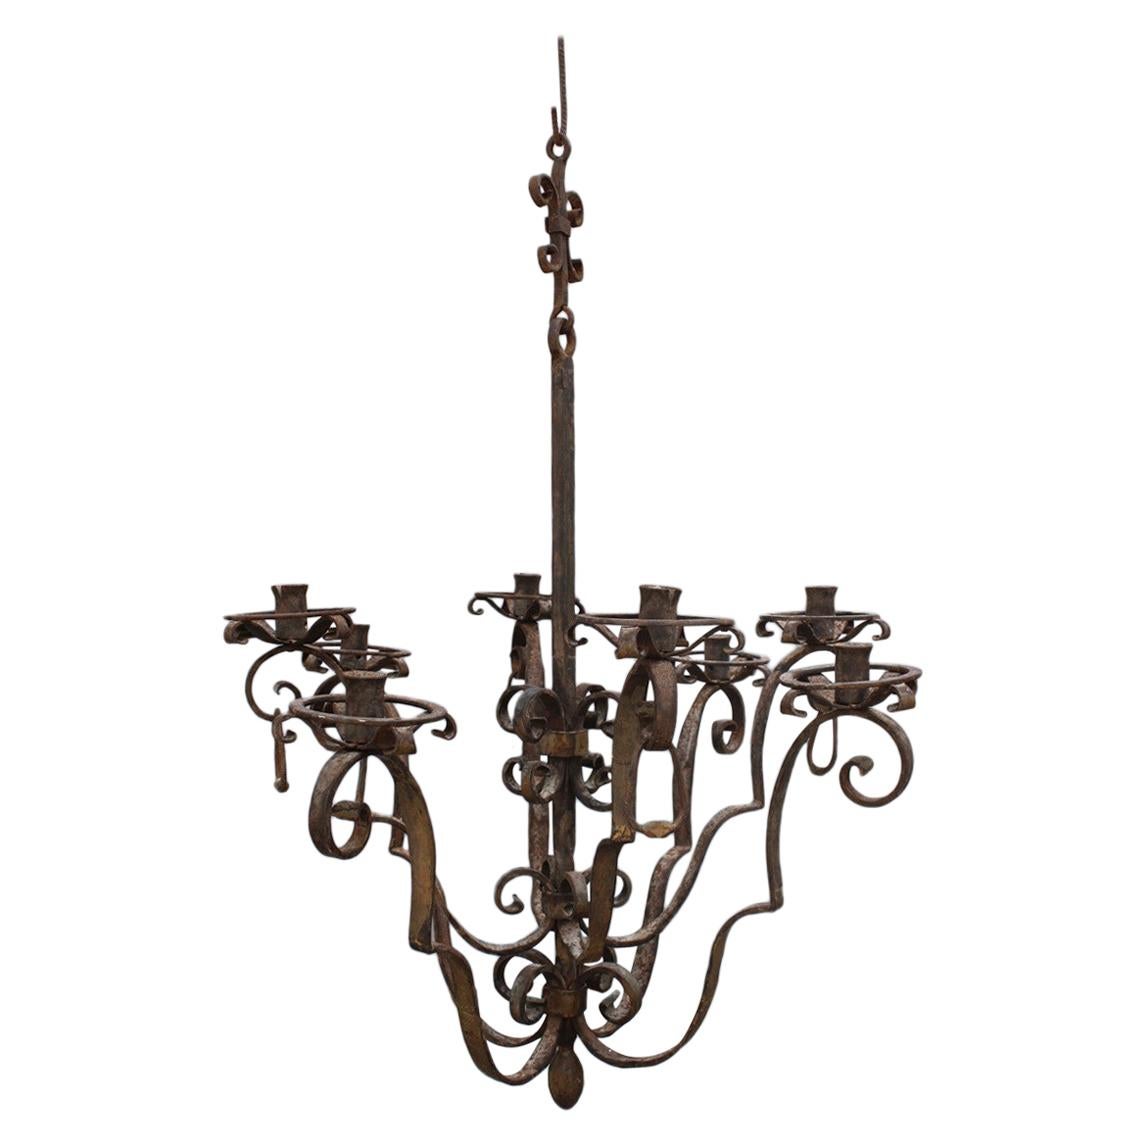 Important Round Chandelier in Italian Baroque Forged Iron